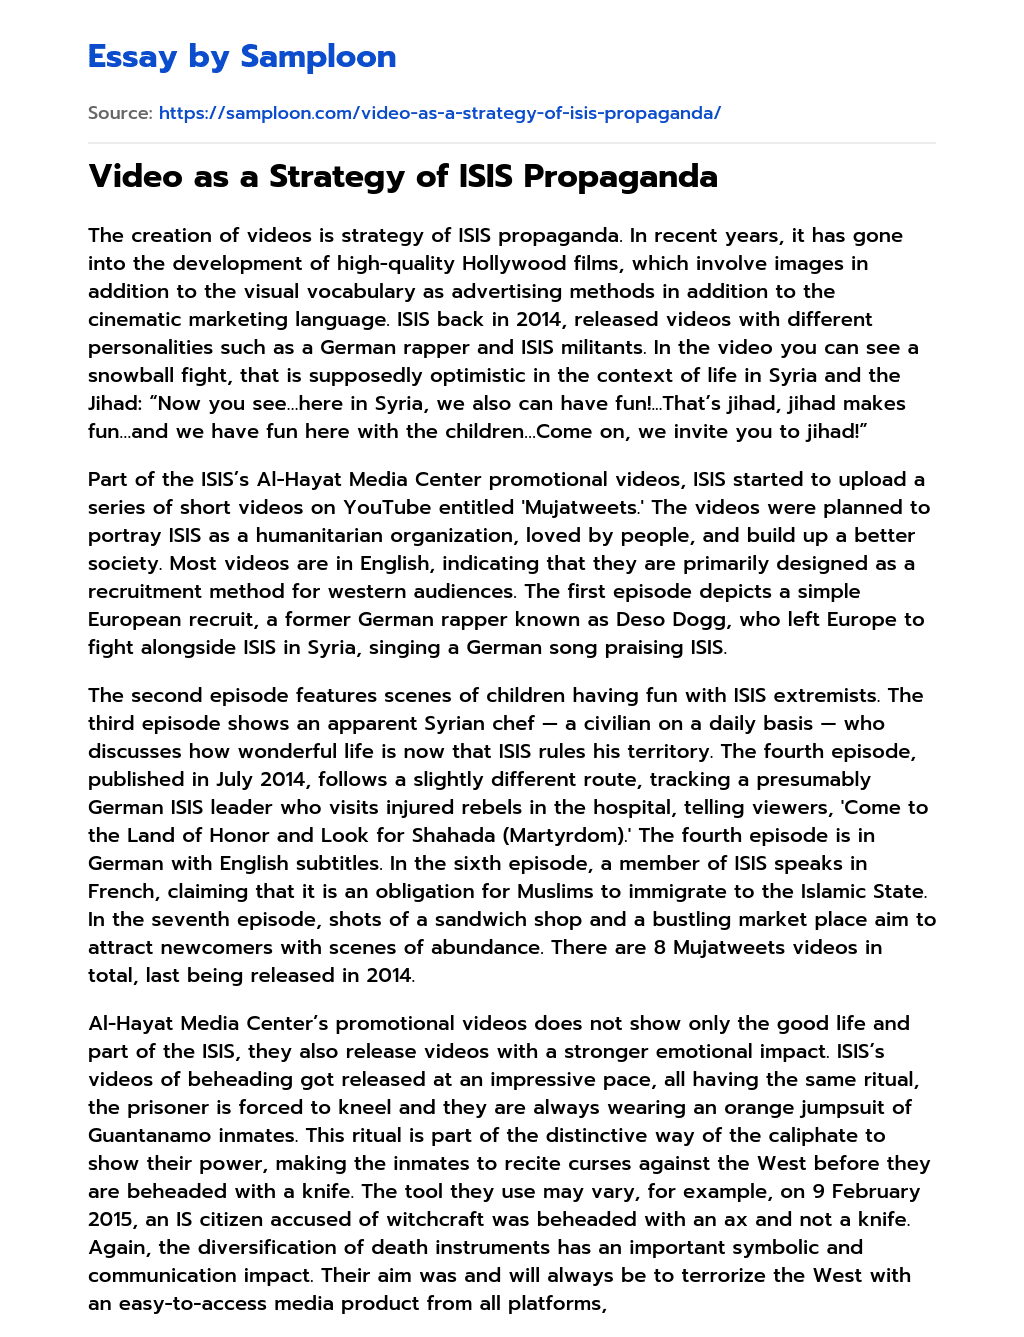 Video as a Strategy of ISIS Propaganda essay